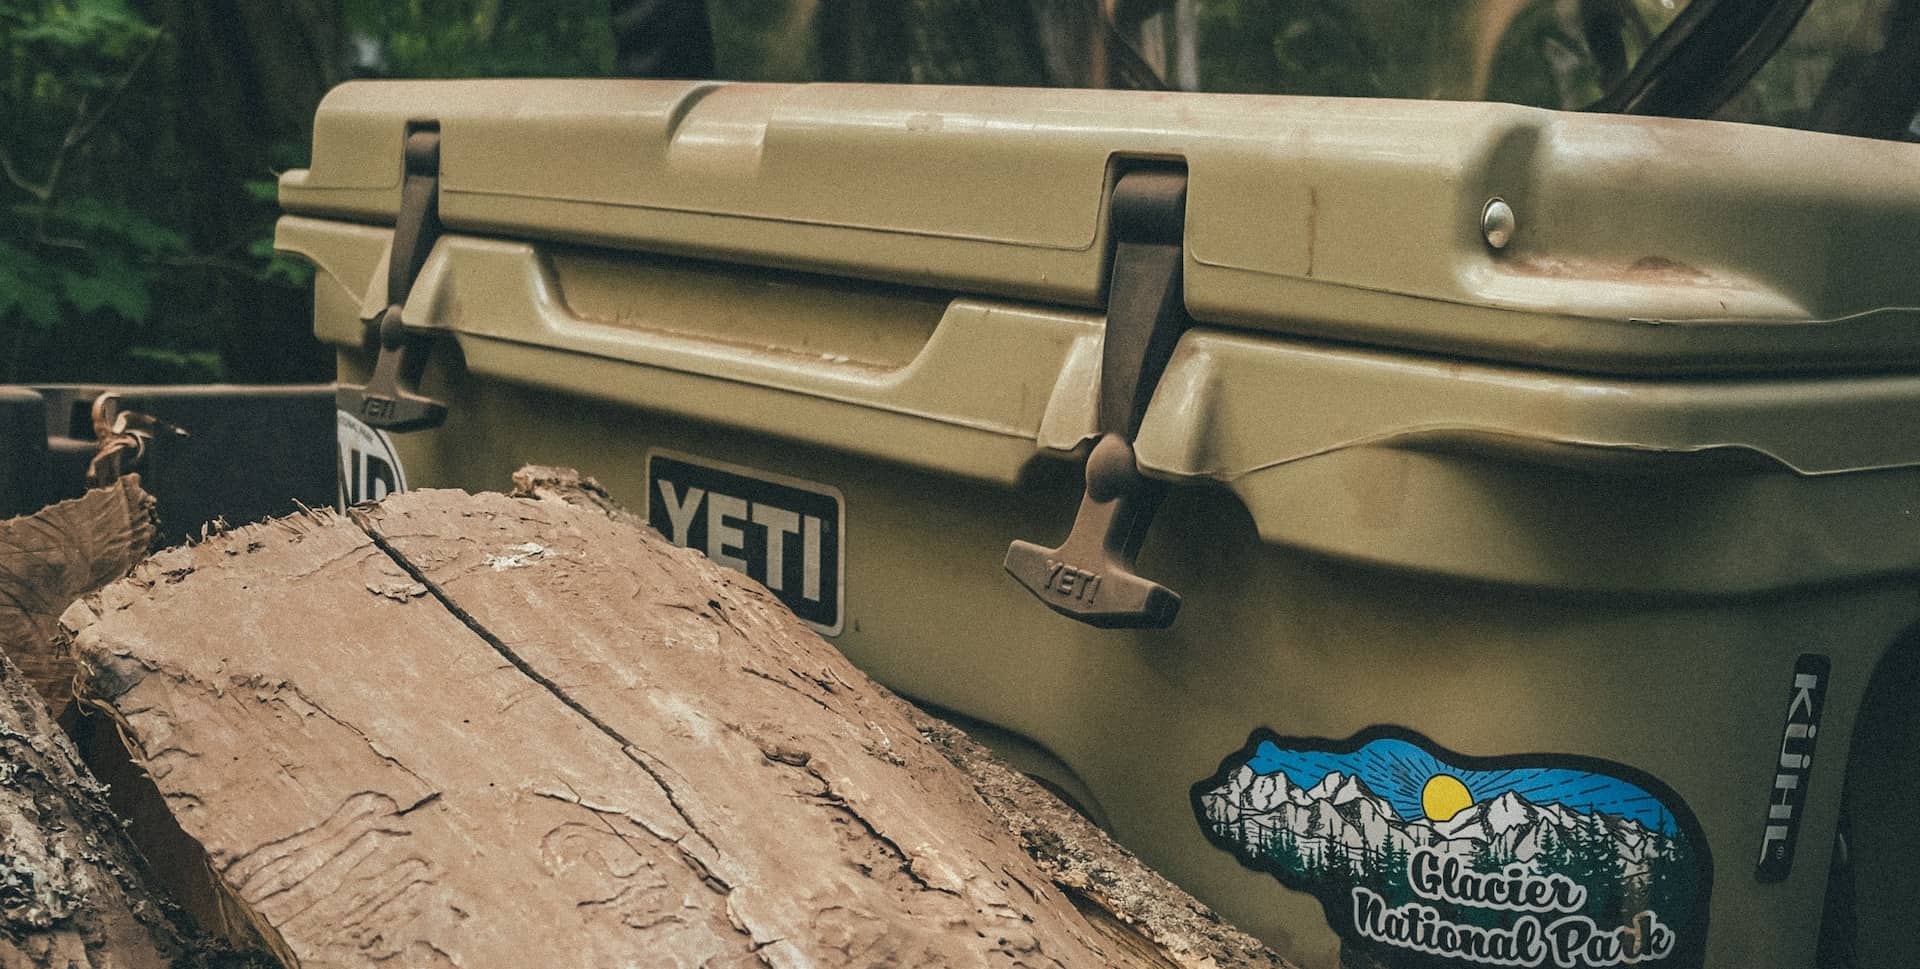 Are Yeti coolers worth it for camping